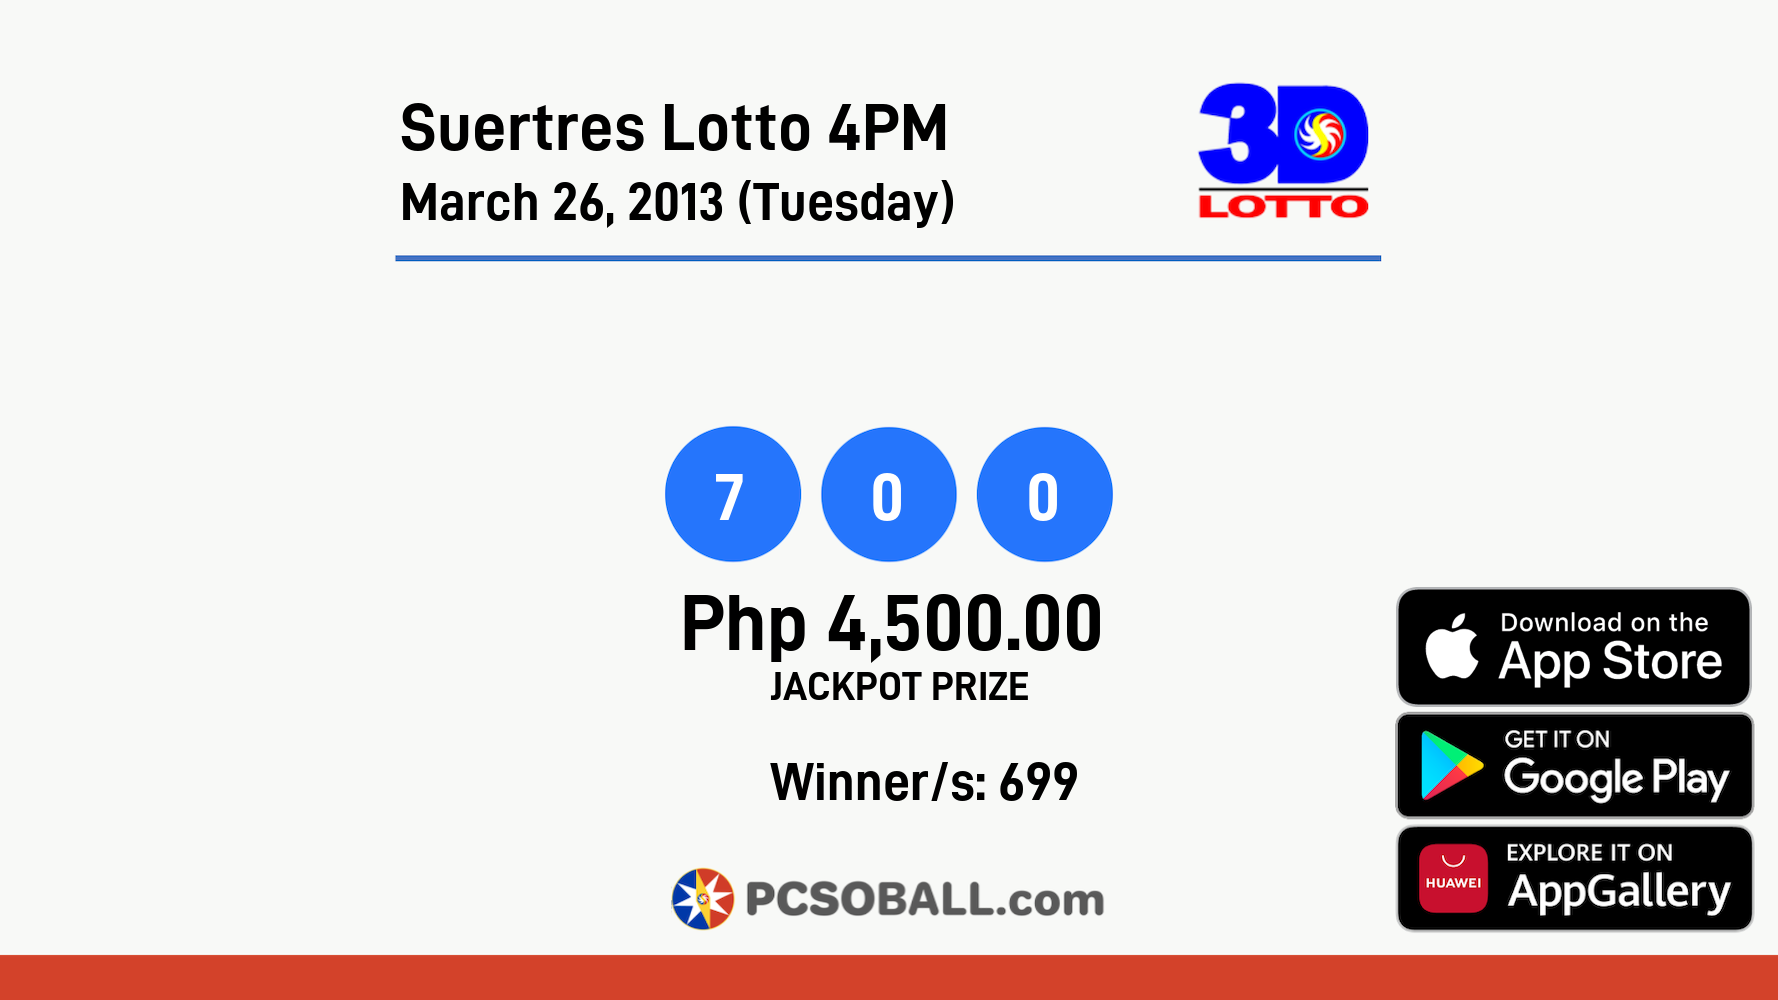 Suertres Lotto 4PM March 26, 2013 (Tuesday) Result